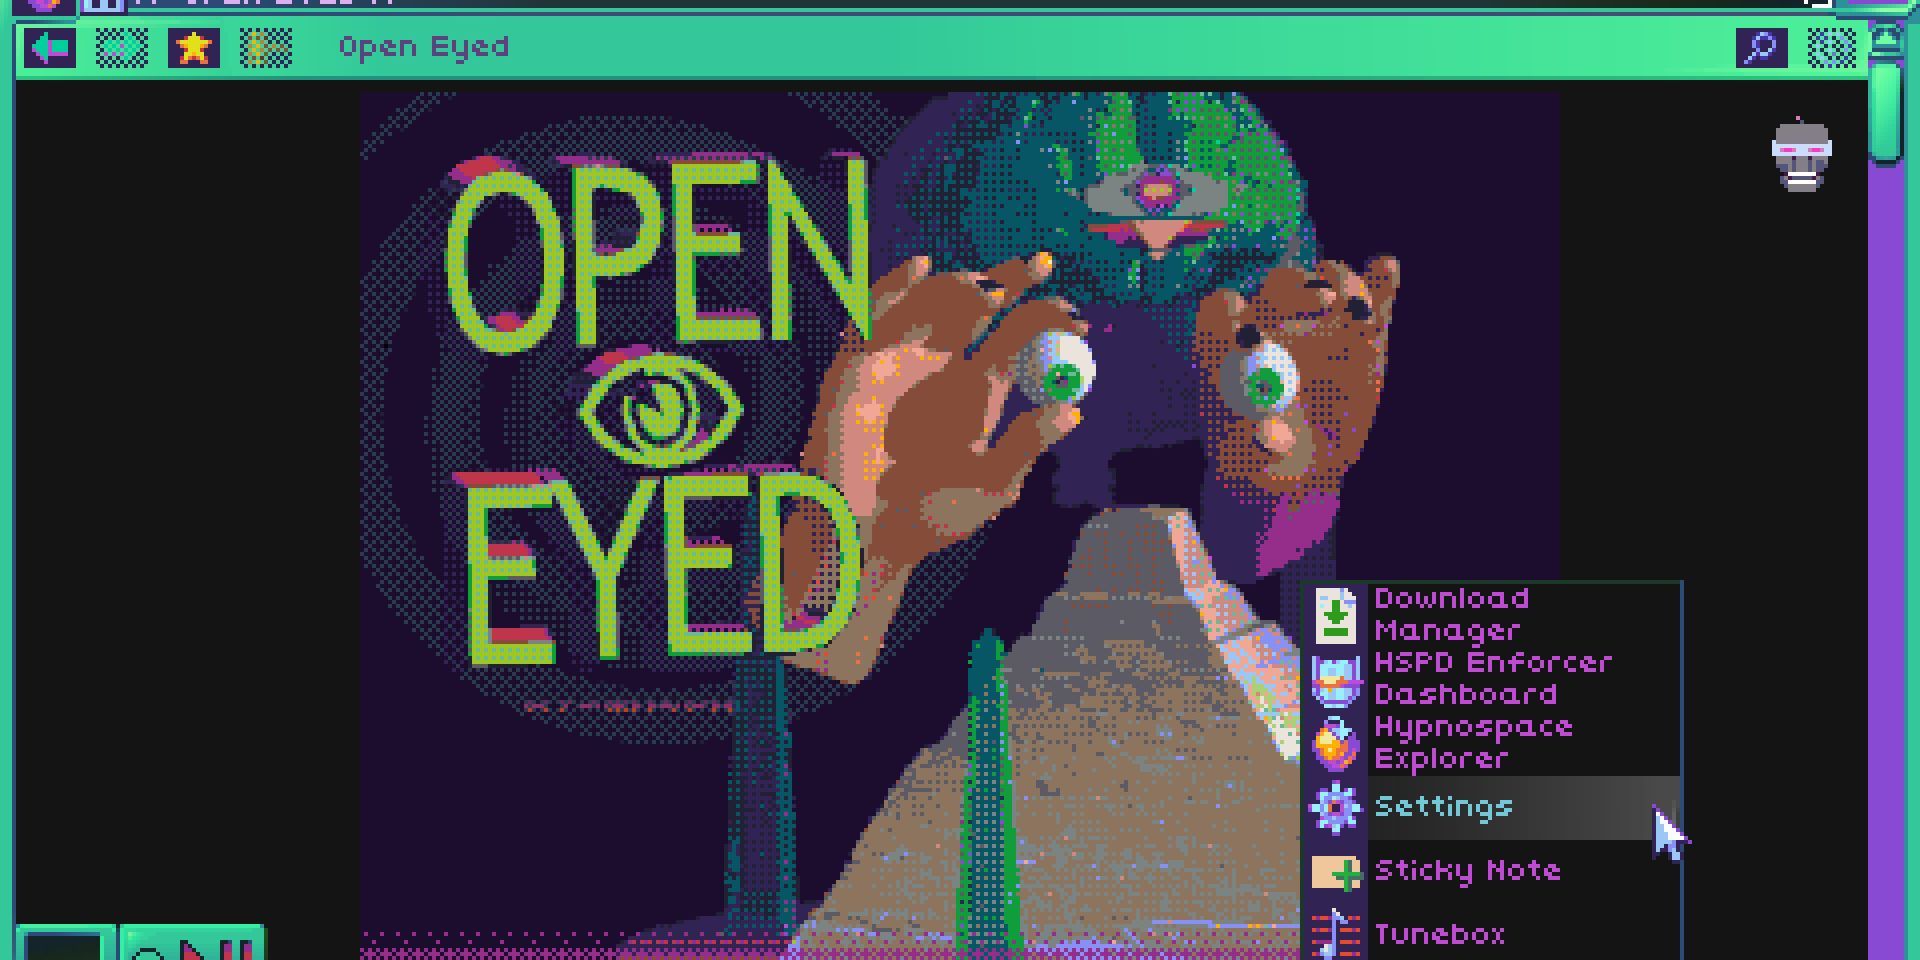 A screenshot from Hypnospace Outlaw showing an in-game website called 